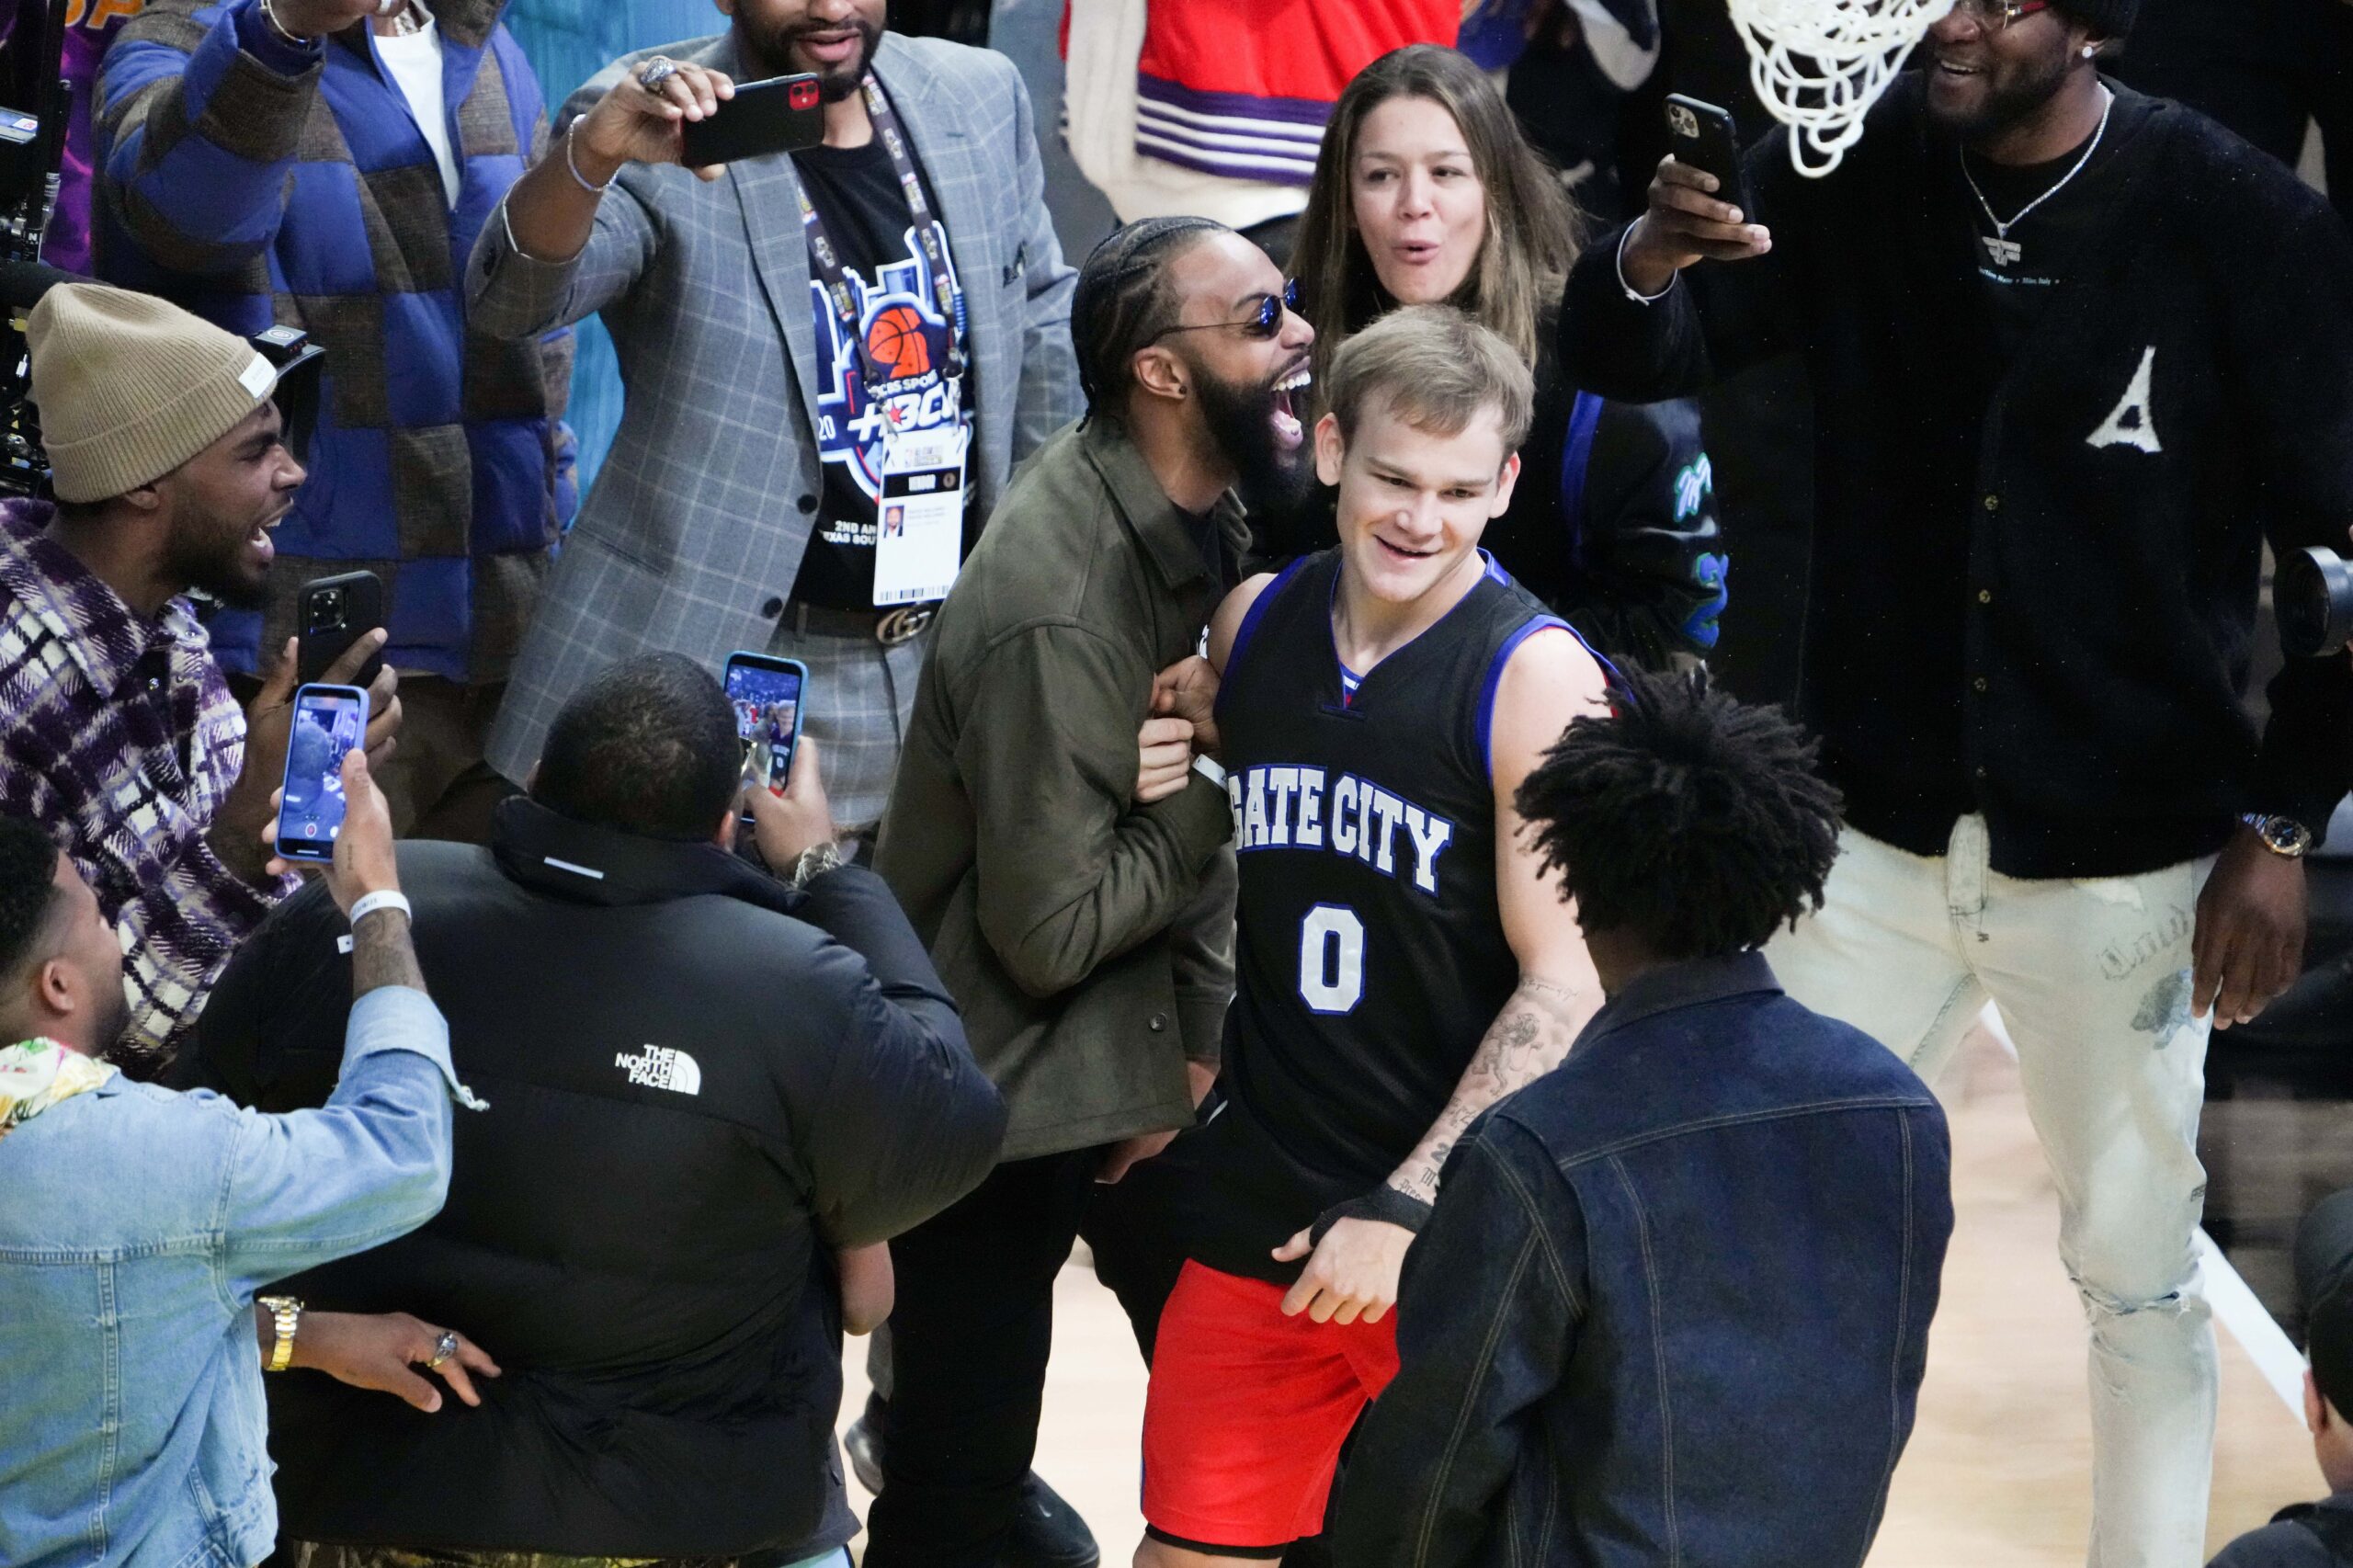 Feb 18, 2023; Salt Lake City, UT, USA; Philadelphia 76ers guard Mac McClung (9) reacts in the Dunk Contest during the 2023 All Star Saturday Night at Vivint Arena. Mandatory Credit: Kirby Lee-USA TODAY Sports